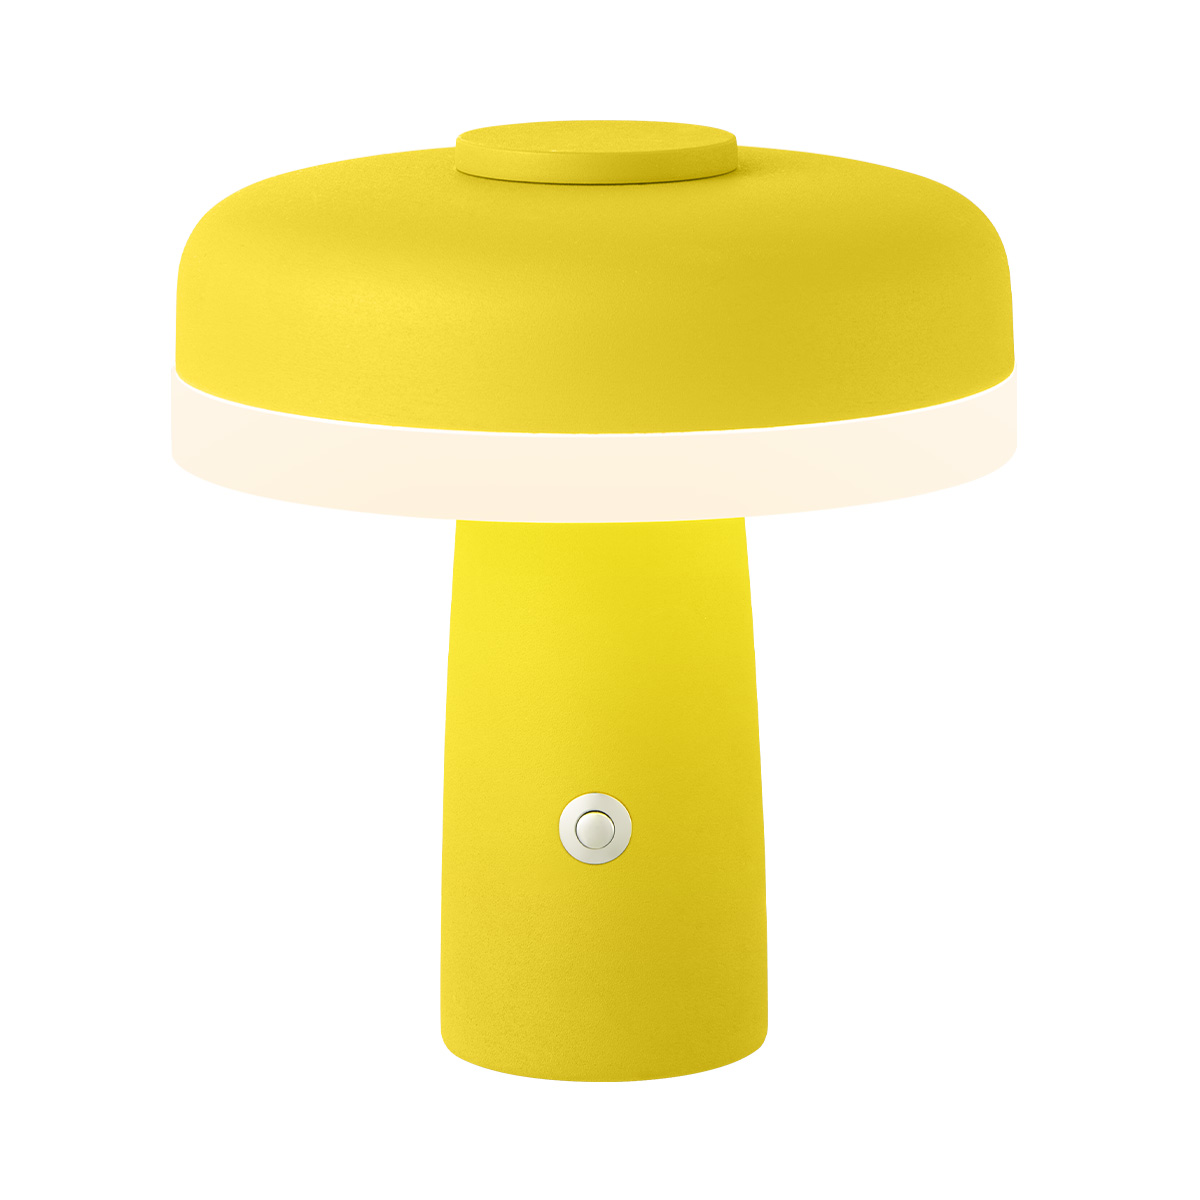 Tangla lighting - TLT7499-01IT - LED Table lamp - rechargeable metal and glass - yellow - rechargeable